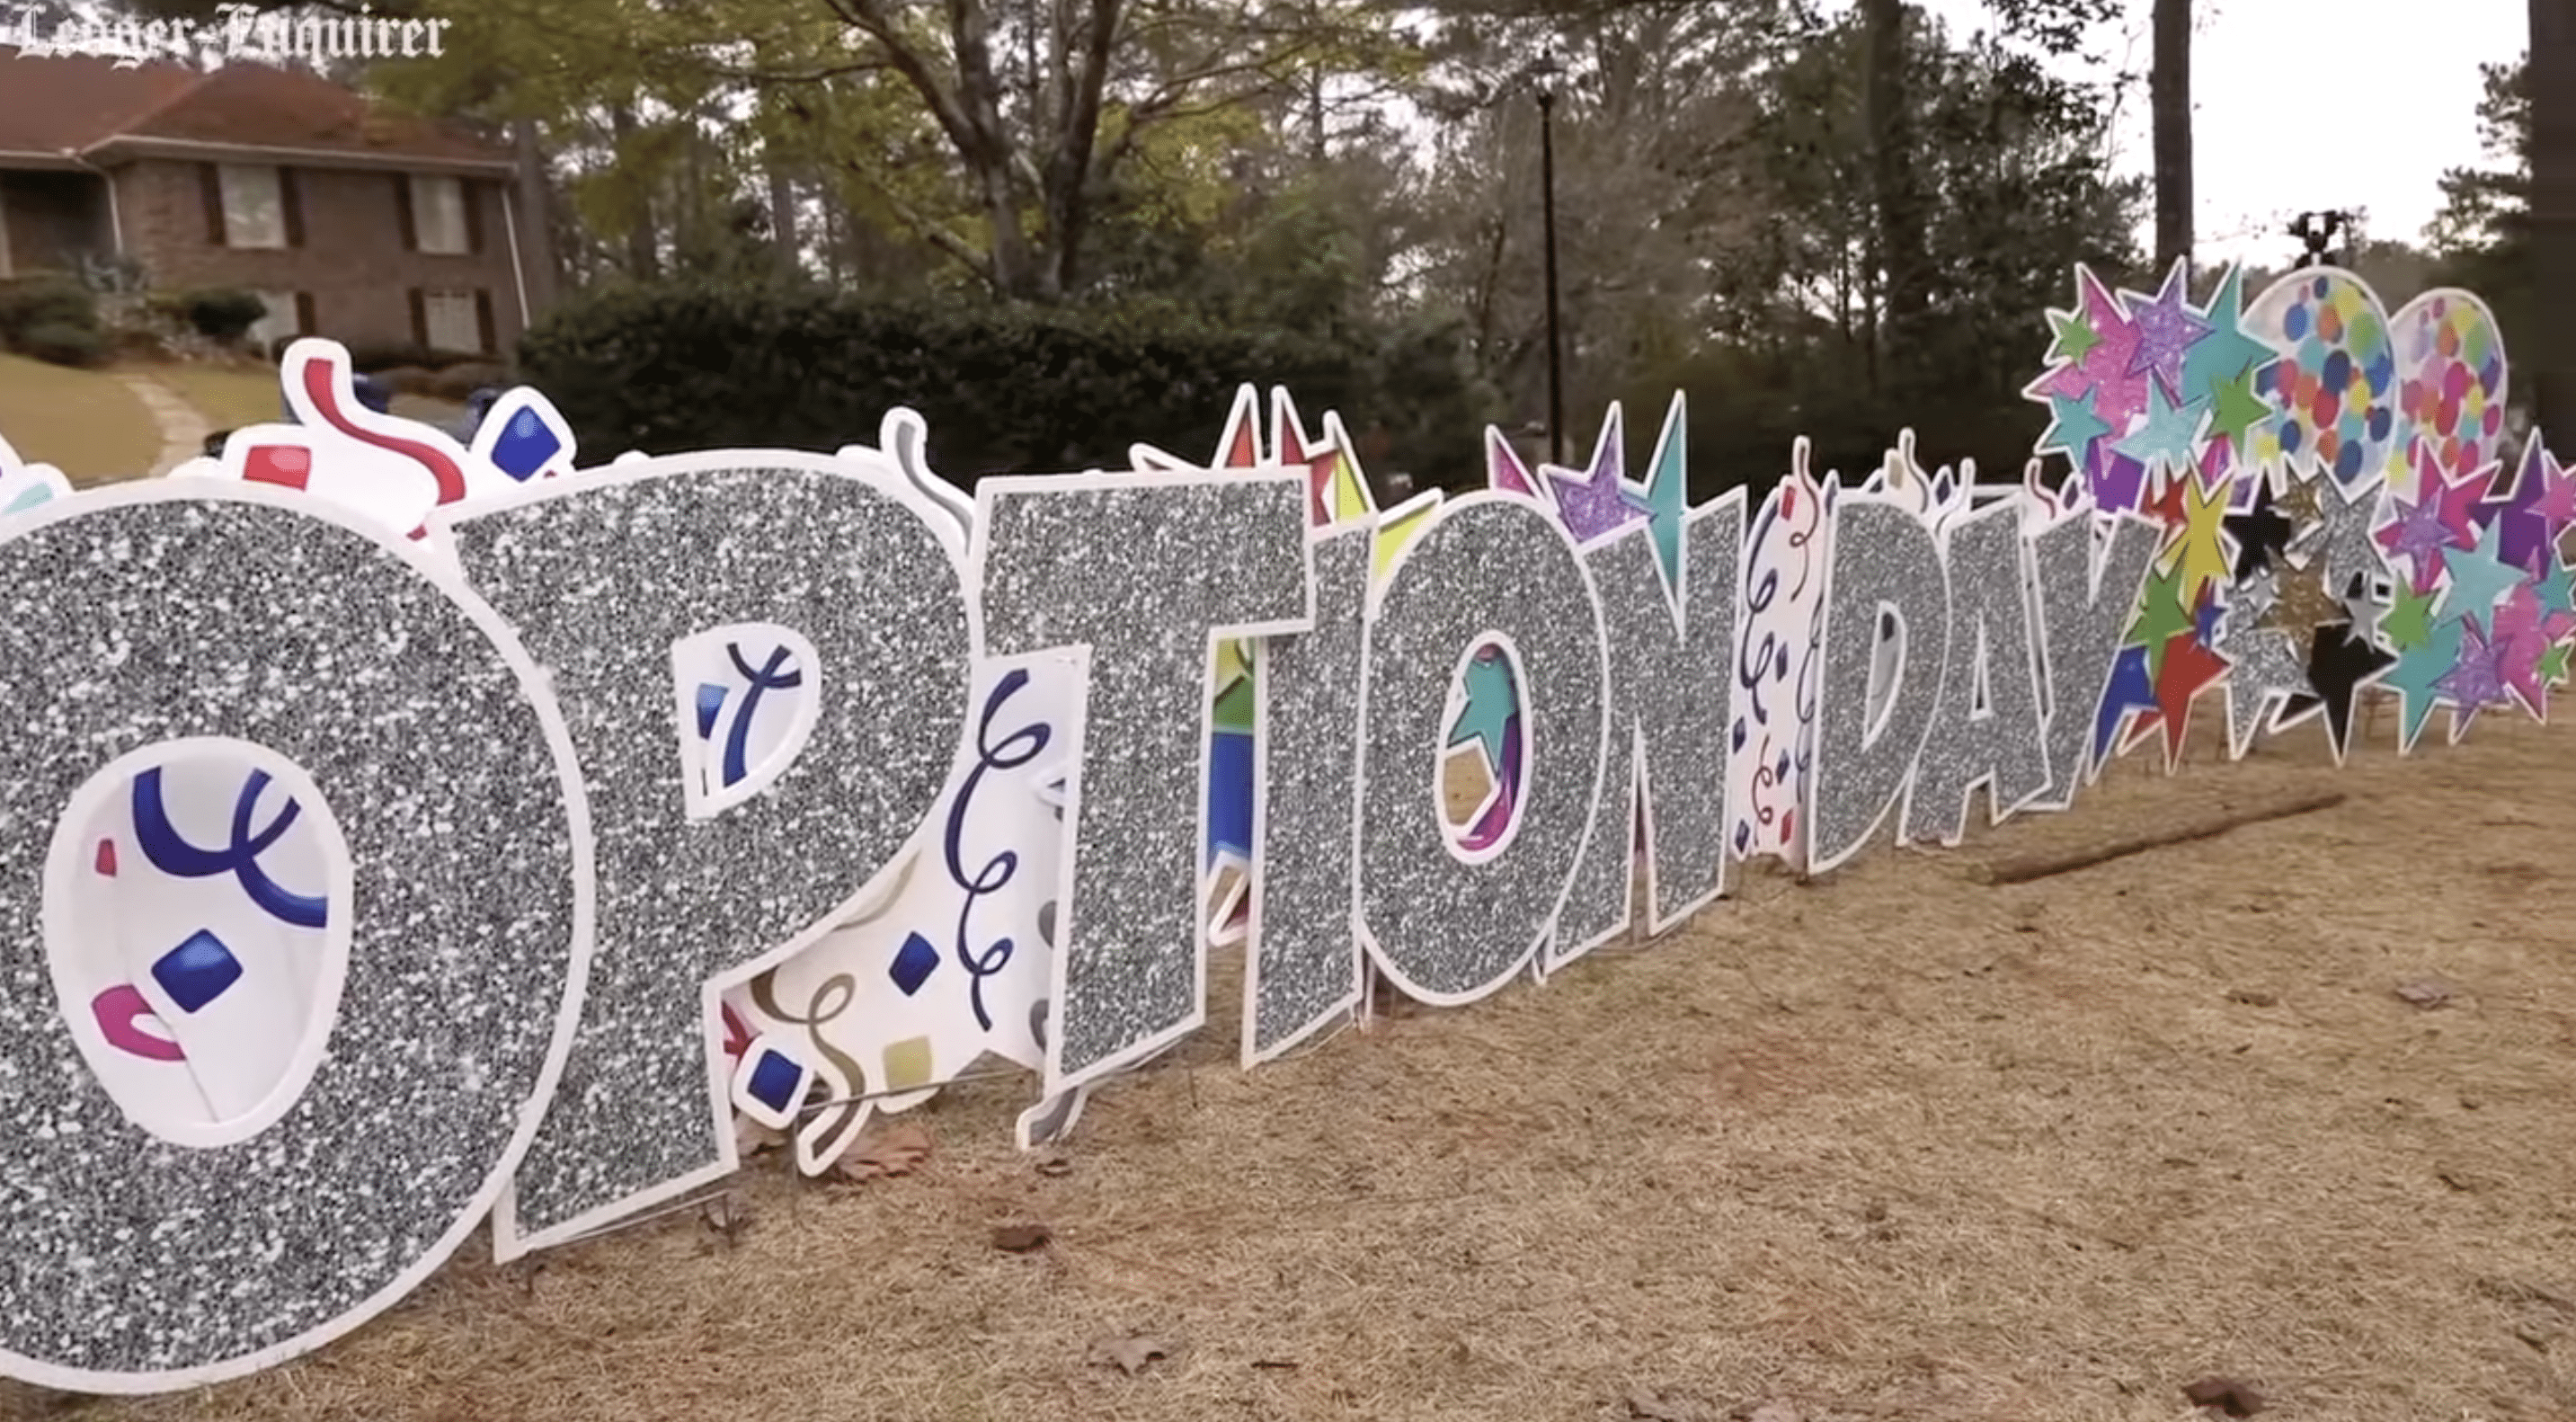 'IT'S ADOPTION DAY' sign placed in the Turbeville's front lawn. | Photo: YouTube.com/Columbus Ledger-Enquirer